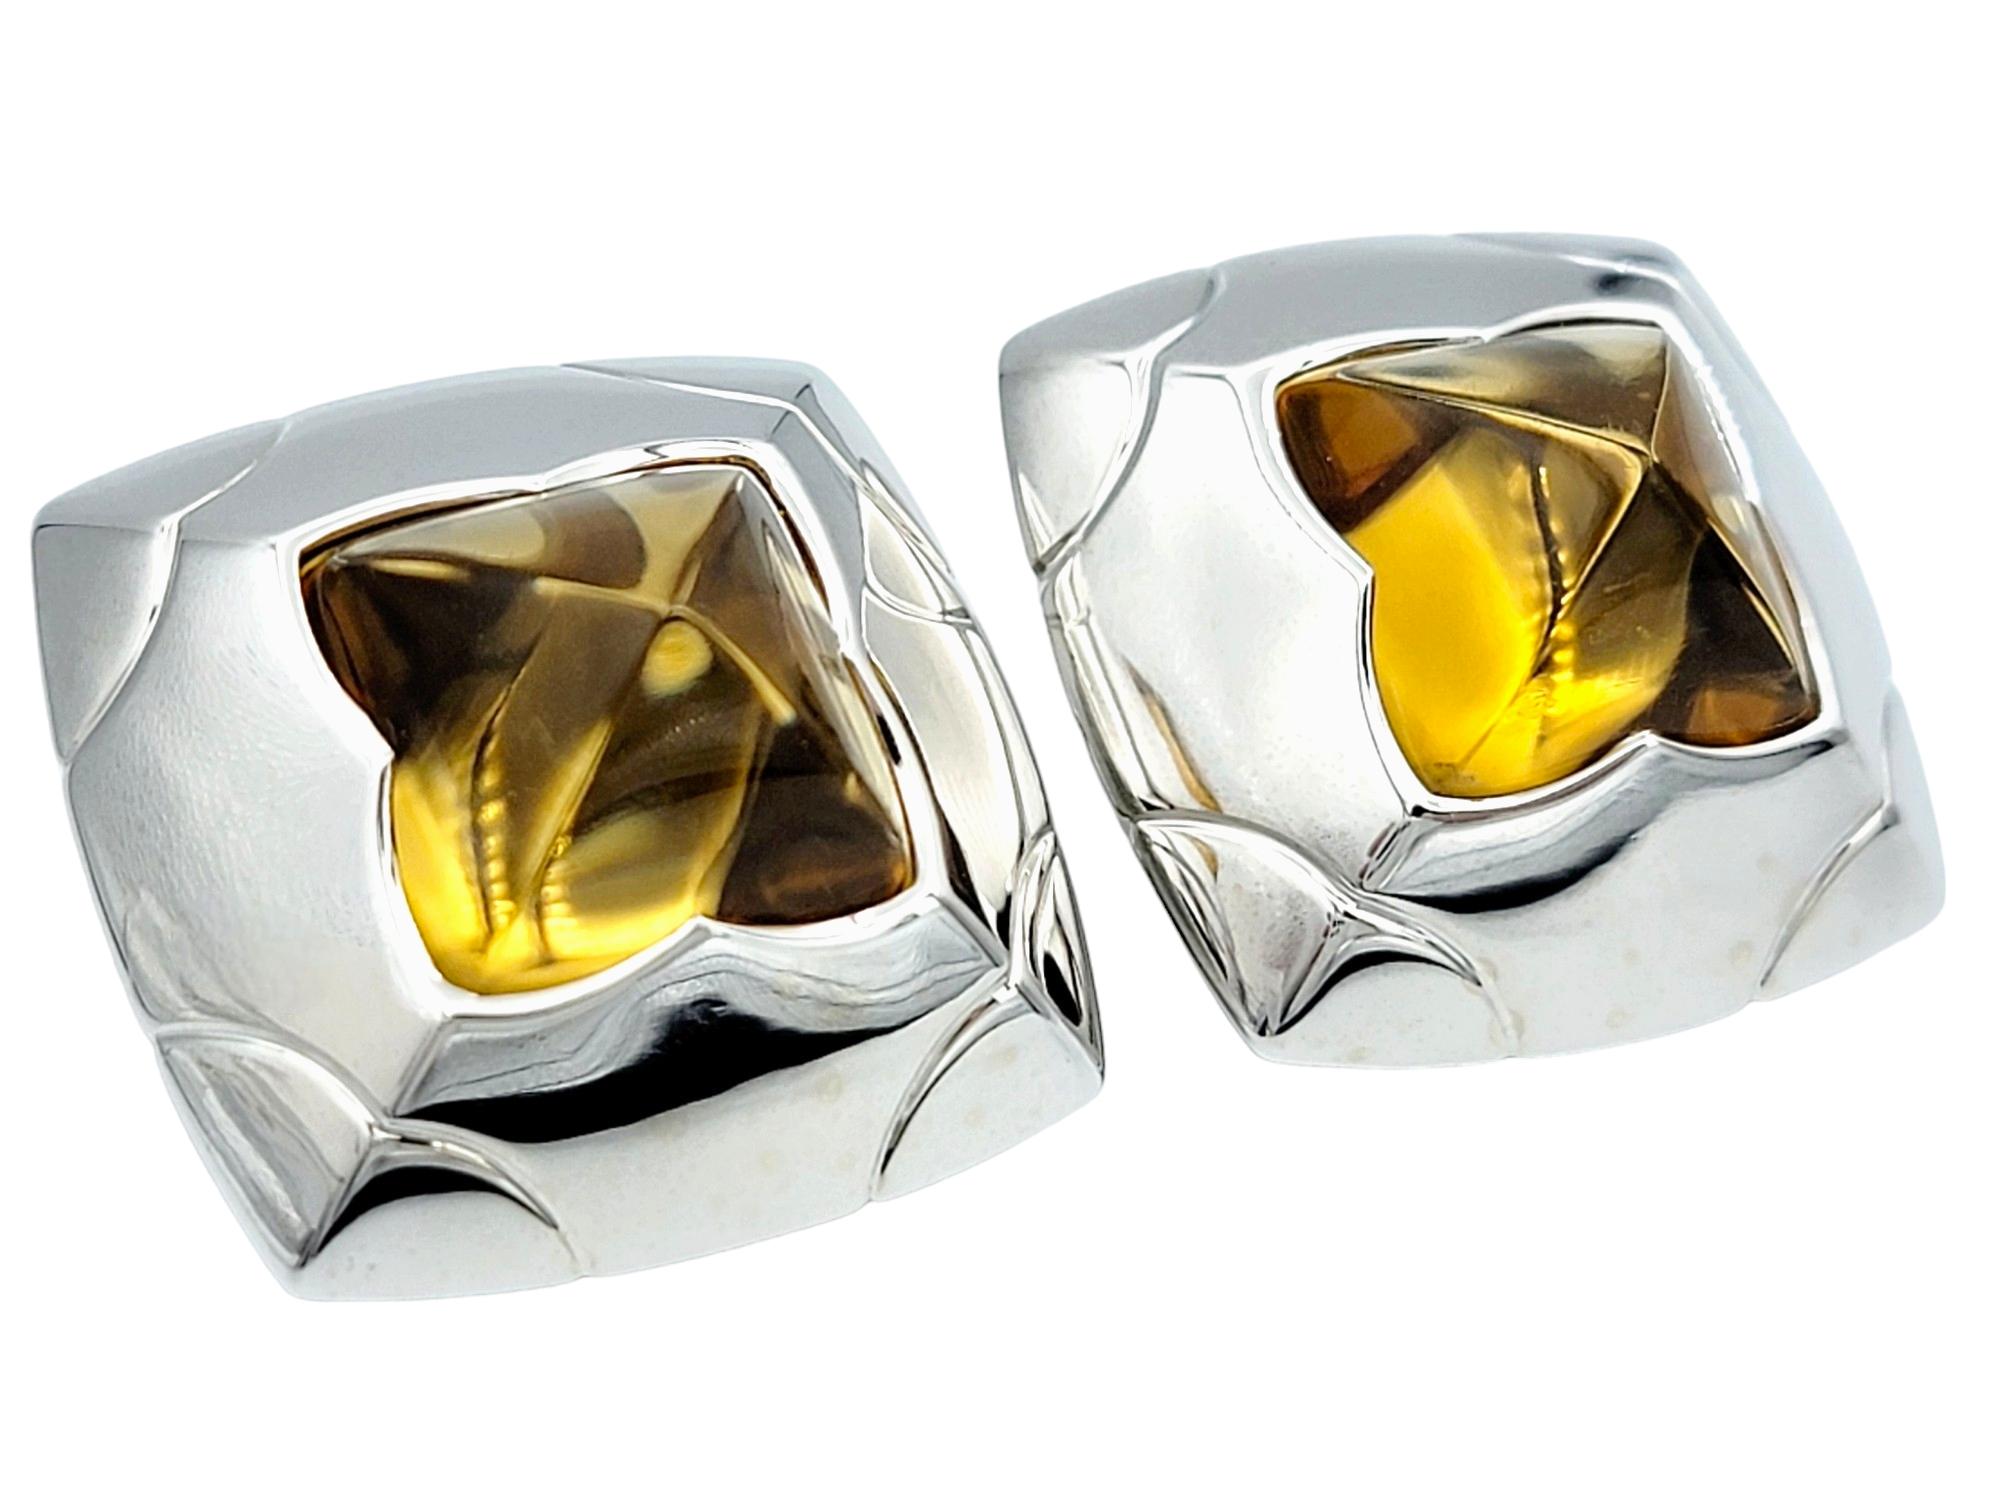 Bvlgari Pyramid Citrine Non-Pierced Stud Style Earrings in 18 Karat White Gold In Good Condition For Sale In Scottsdale, AZ